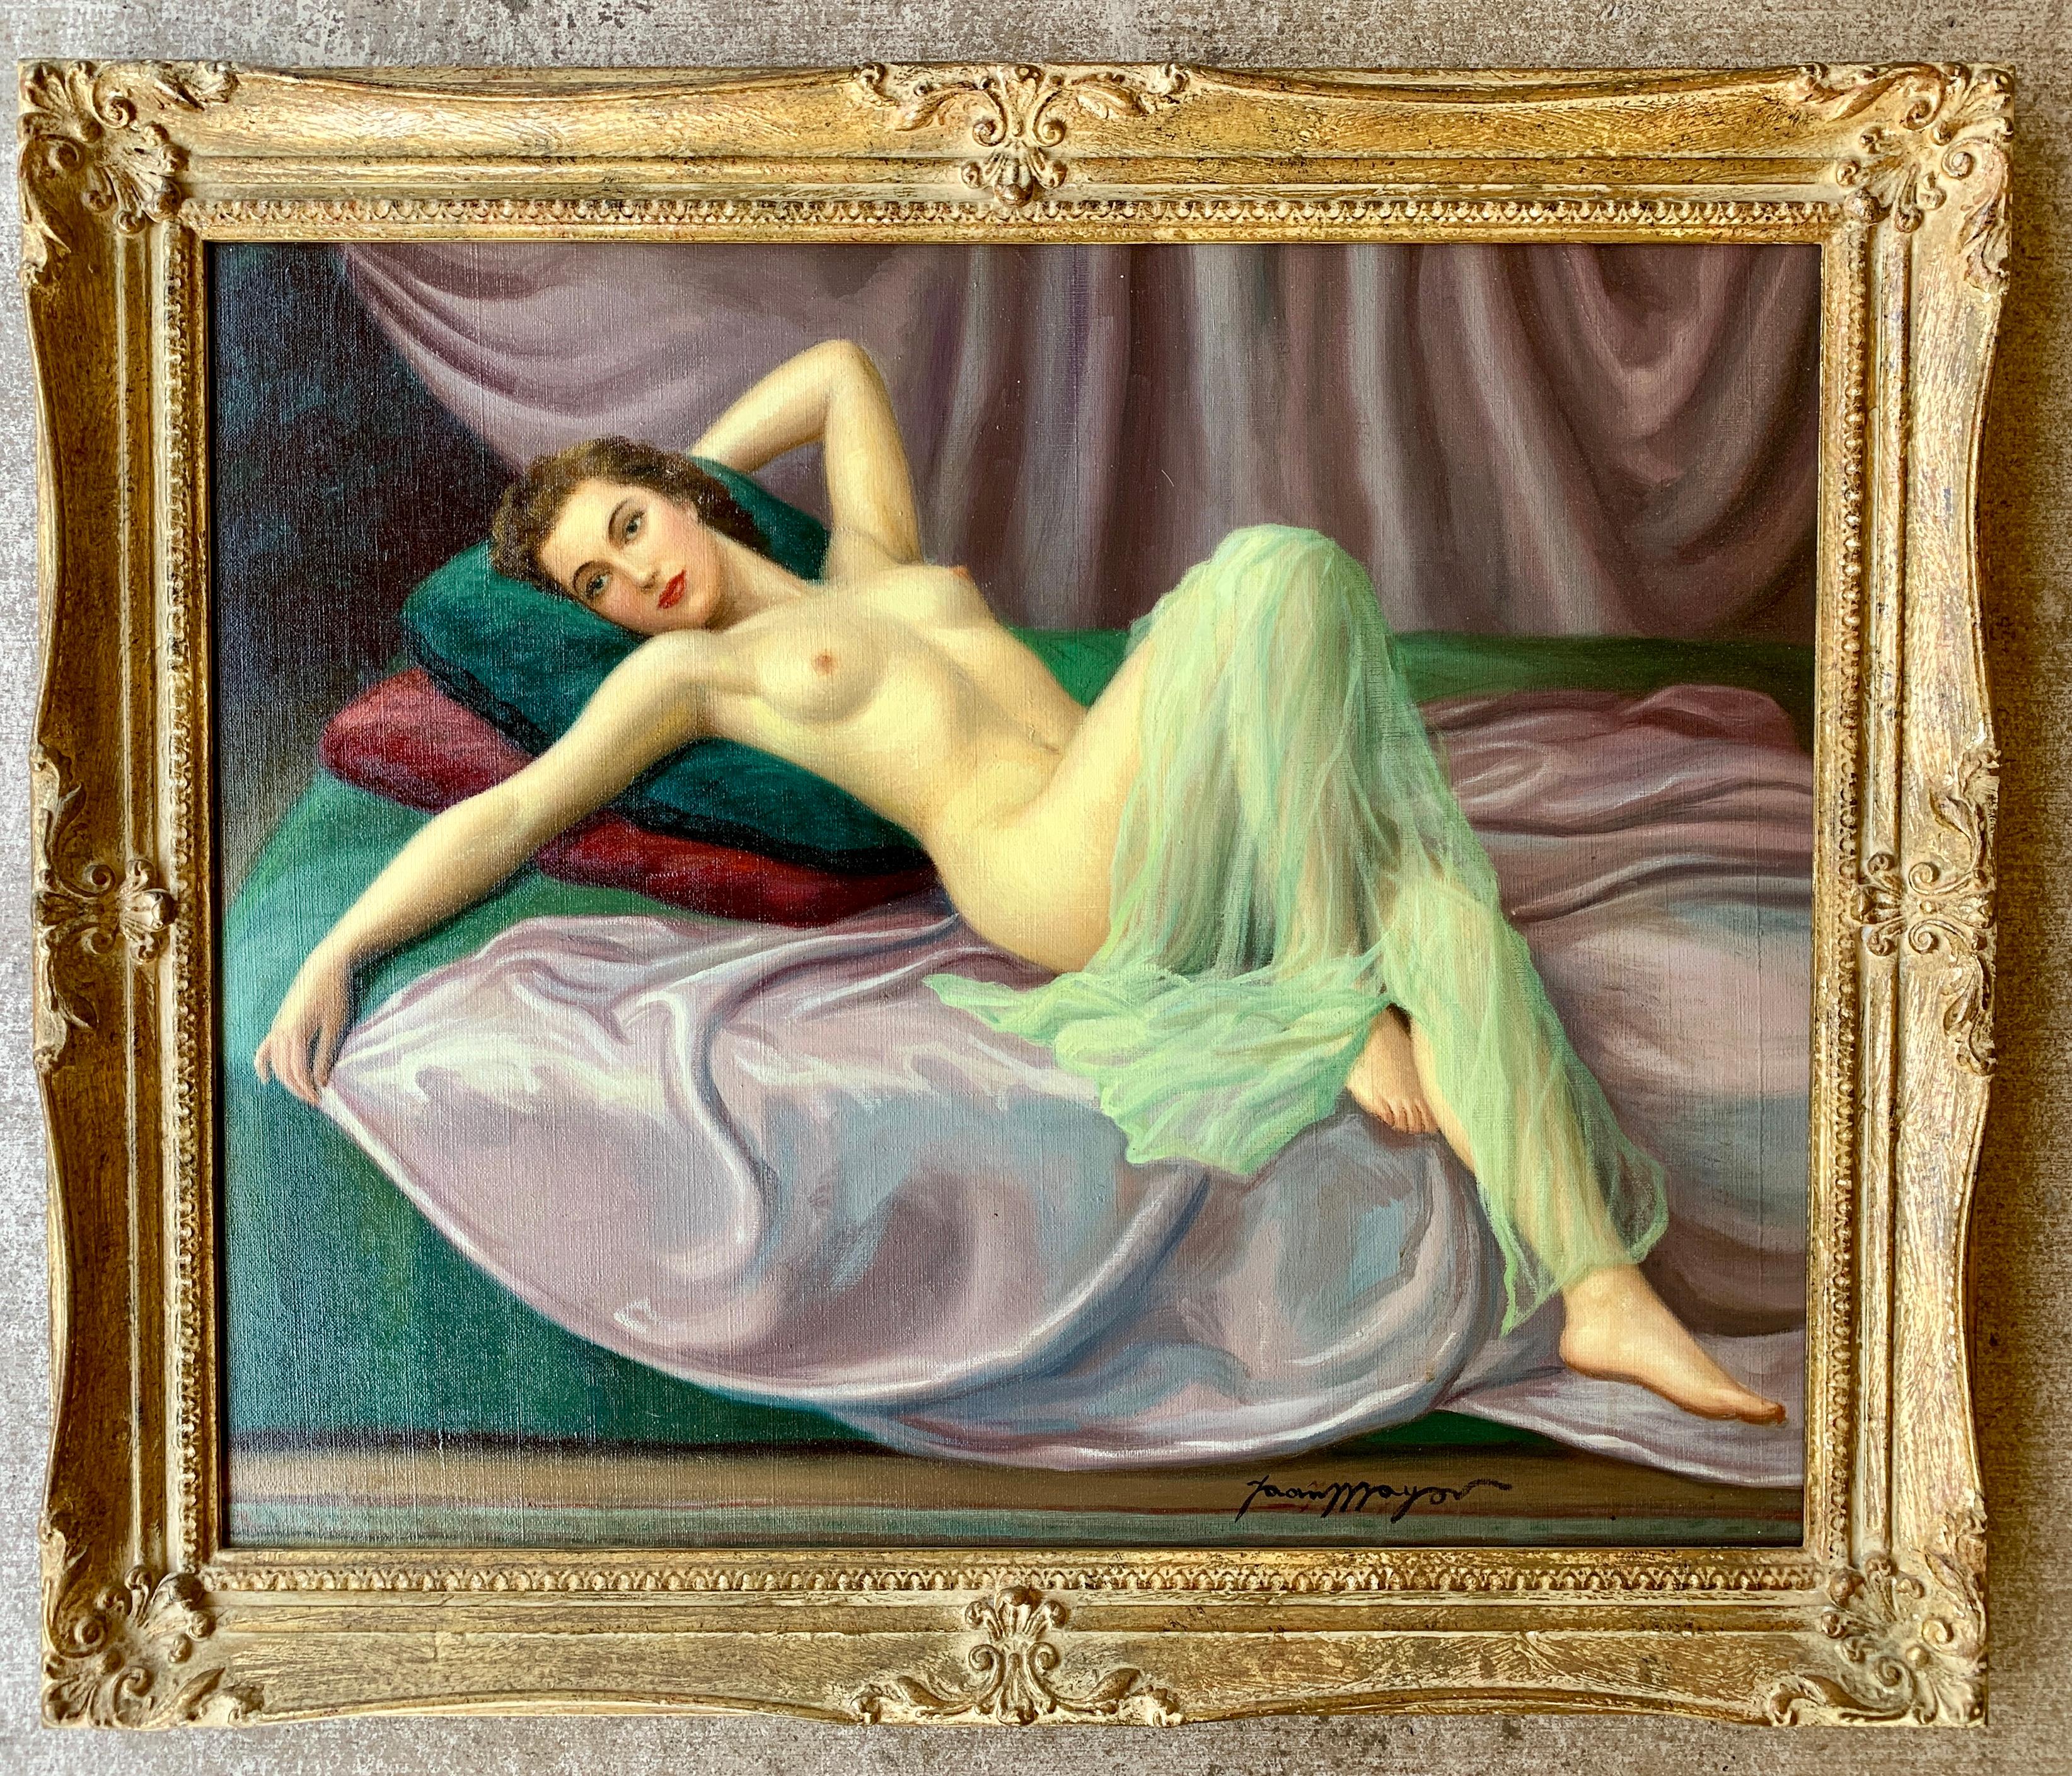 Nude French Paintings